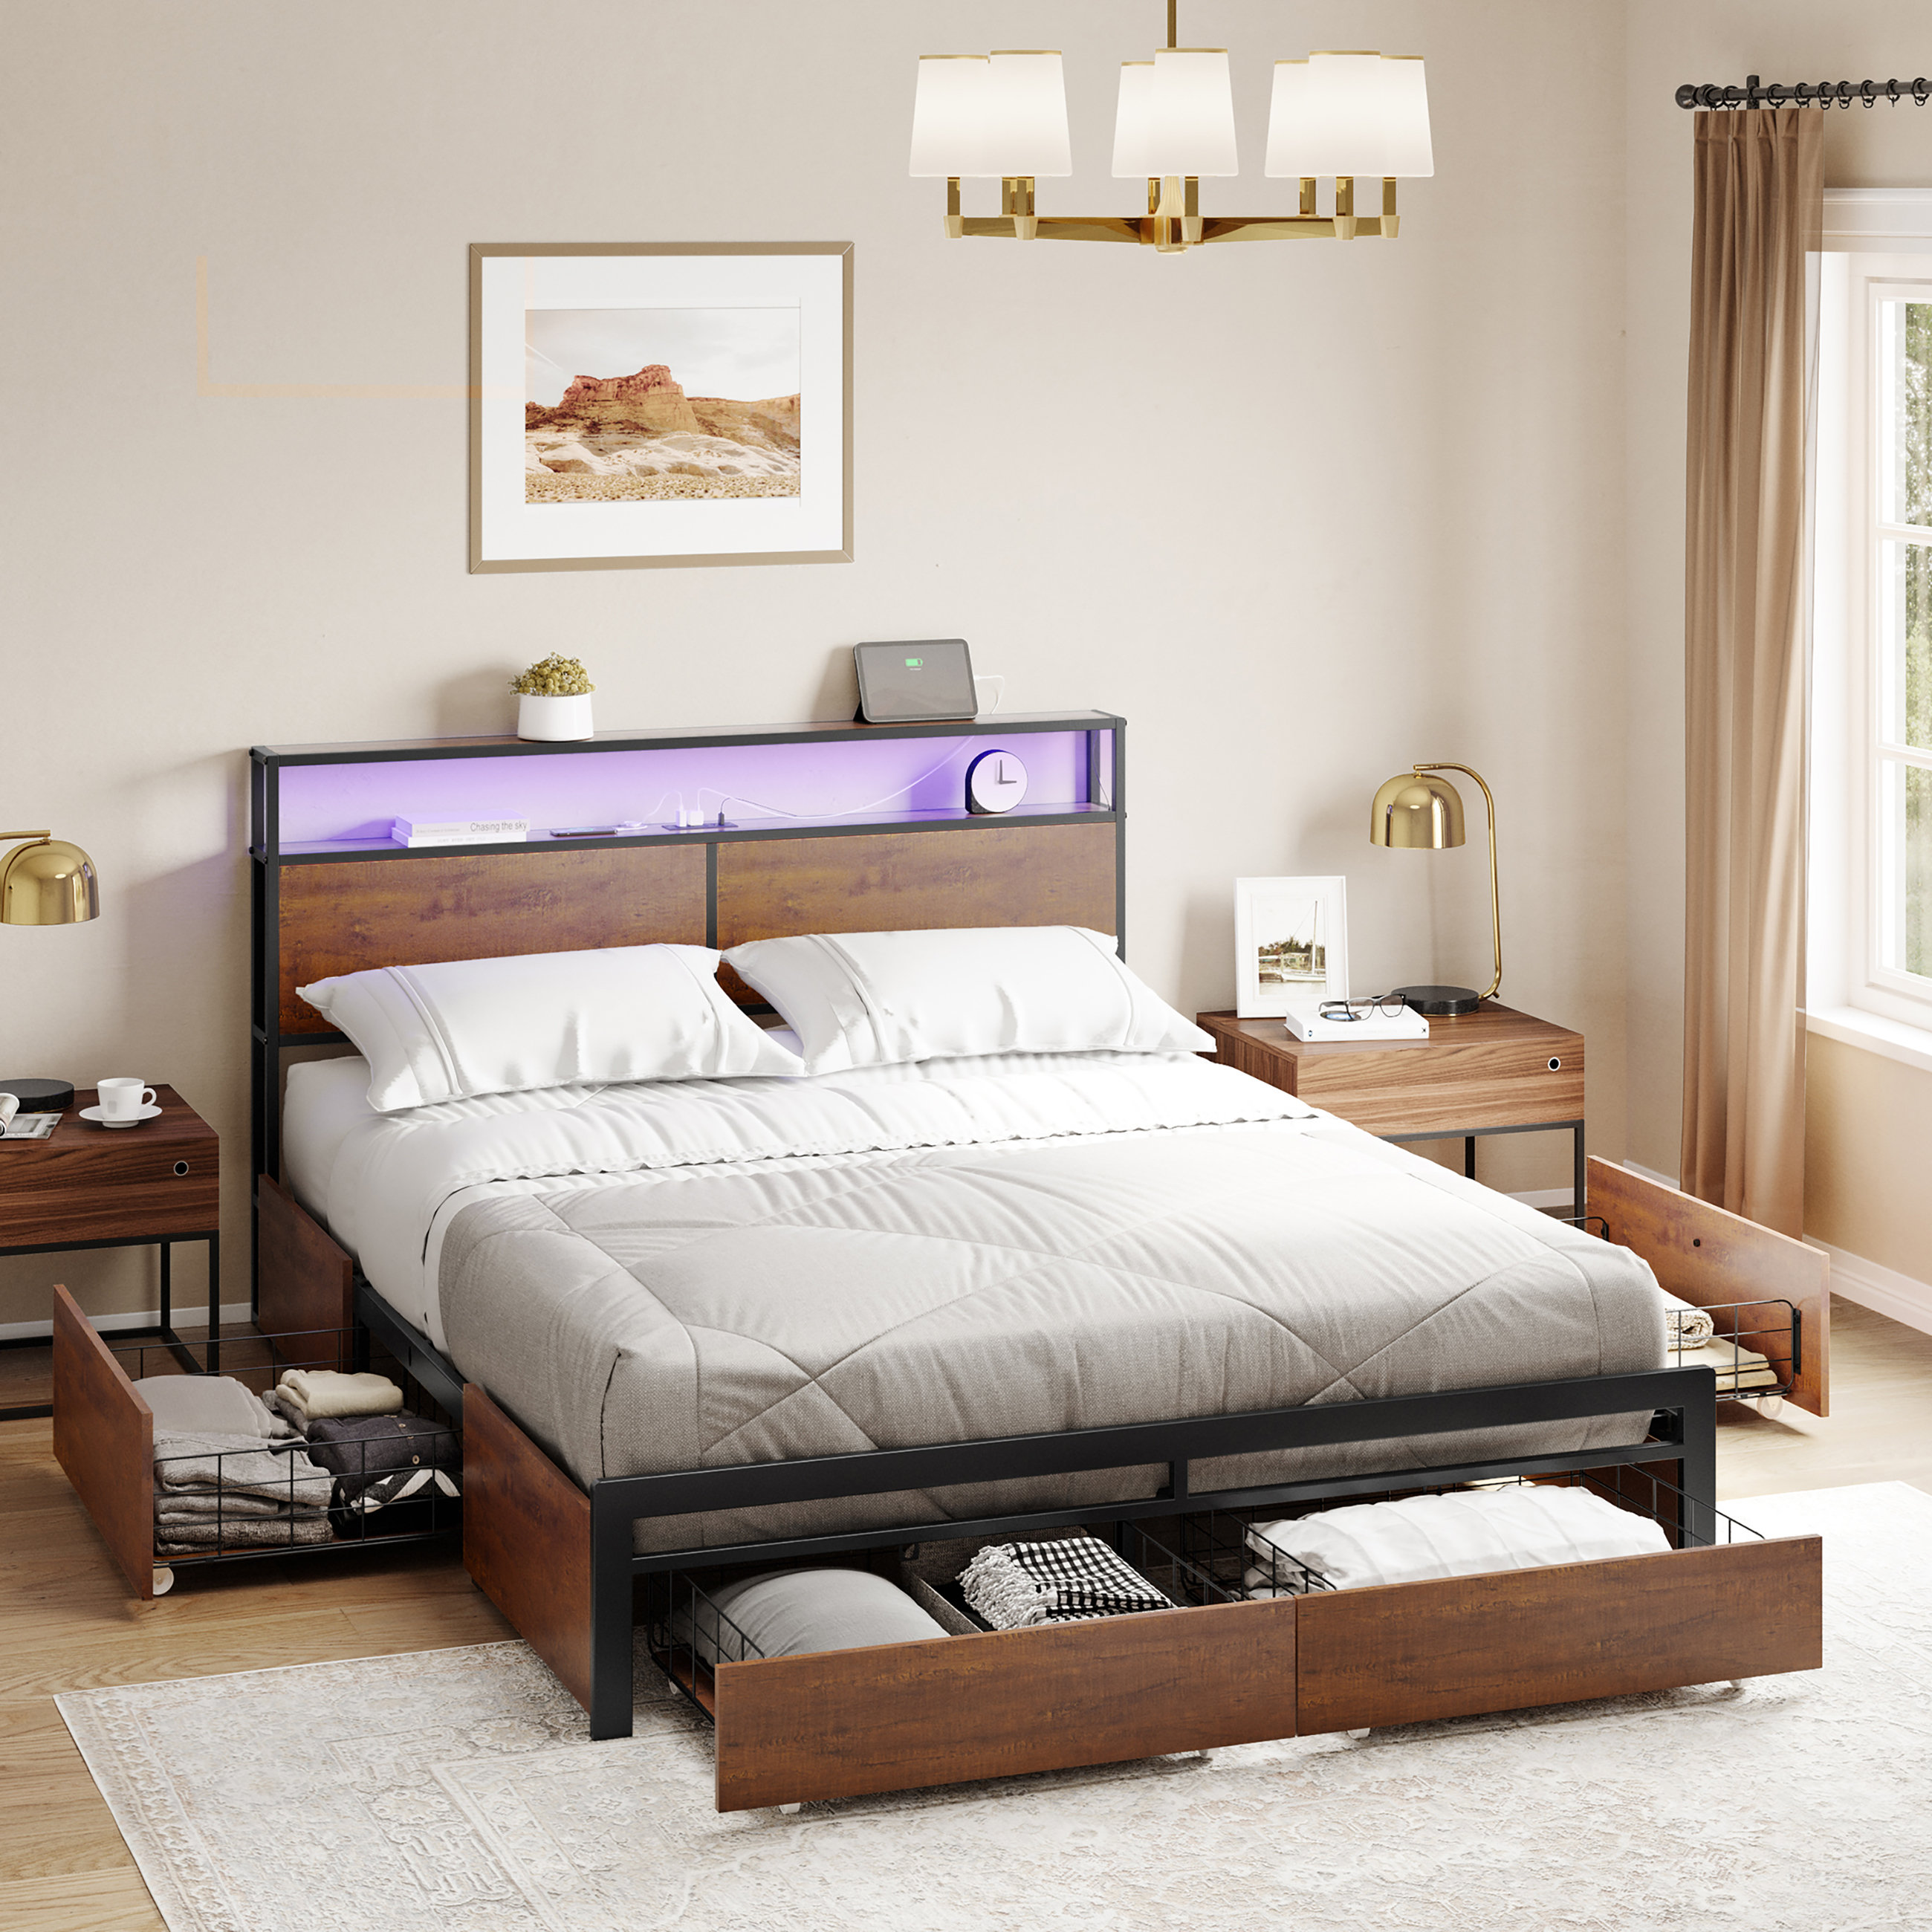 Convenient Simple Metal Excellent Mattress Holder In Place Bed Frame Home